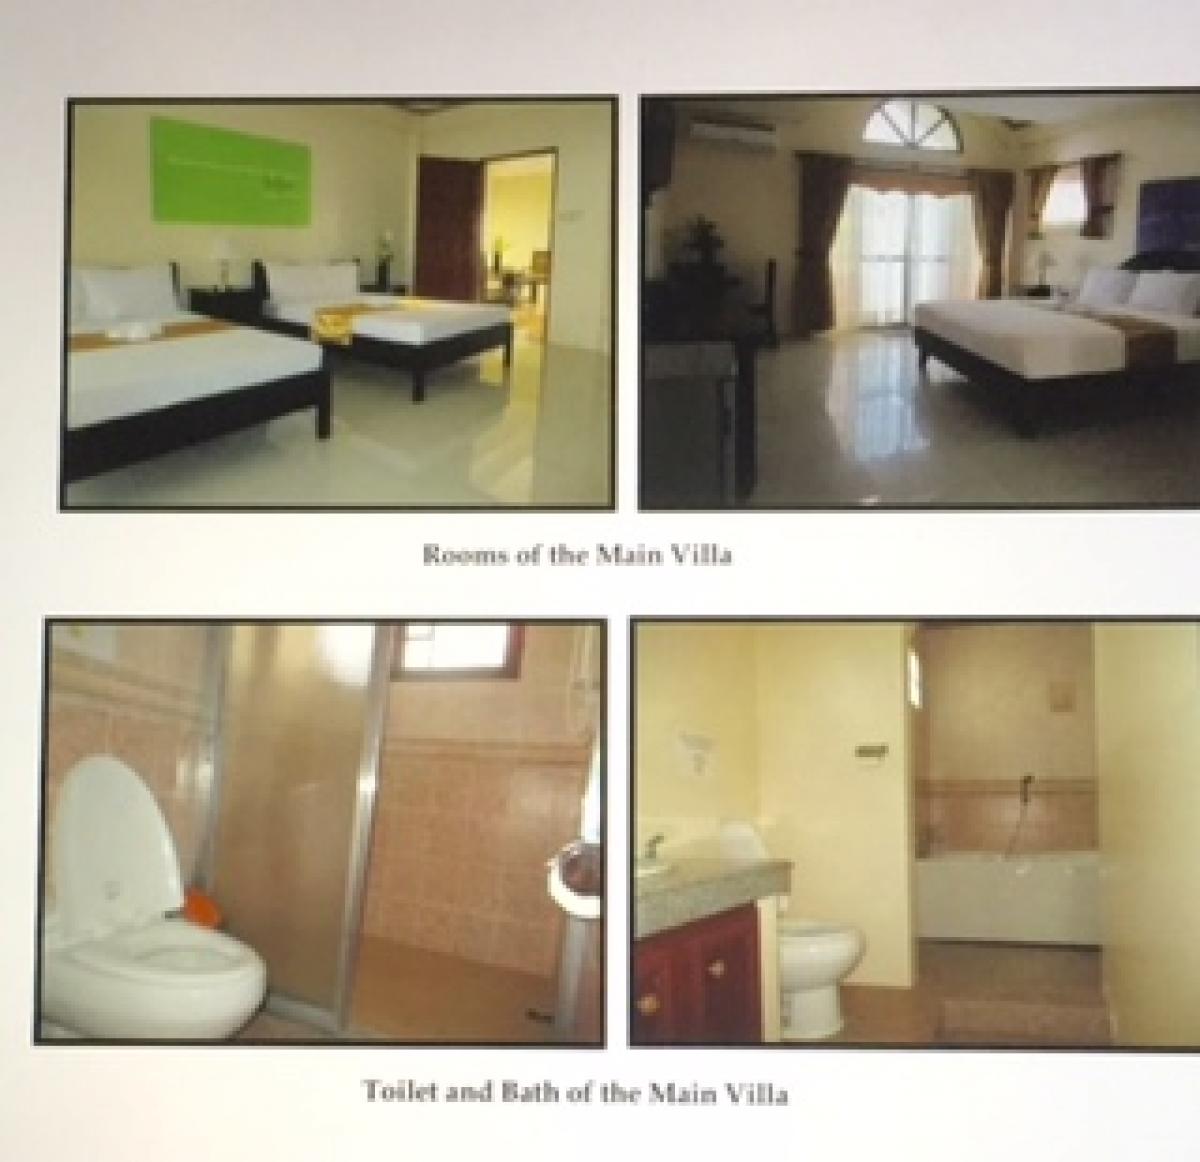 Picture of Commercial Building For Sale in Quezon City, Metro Manila, Philippines